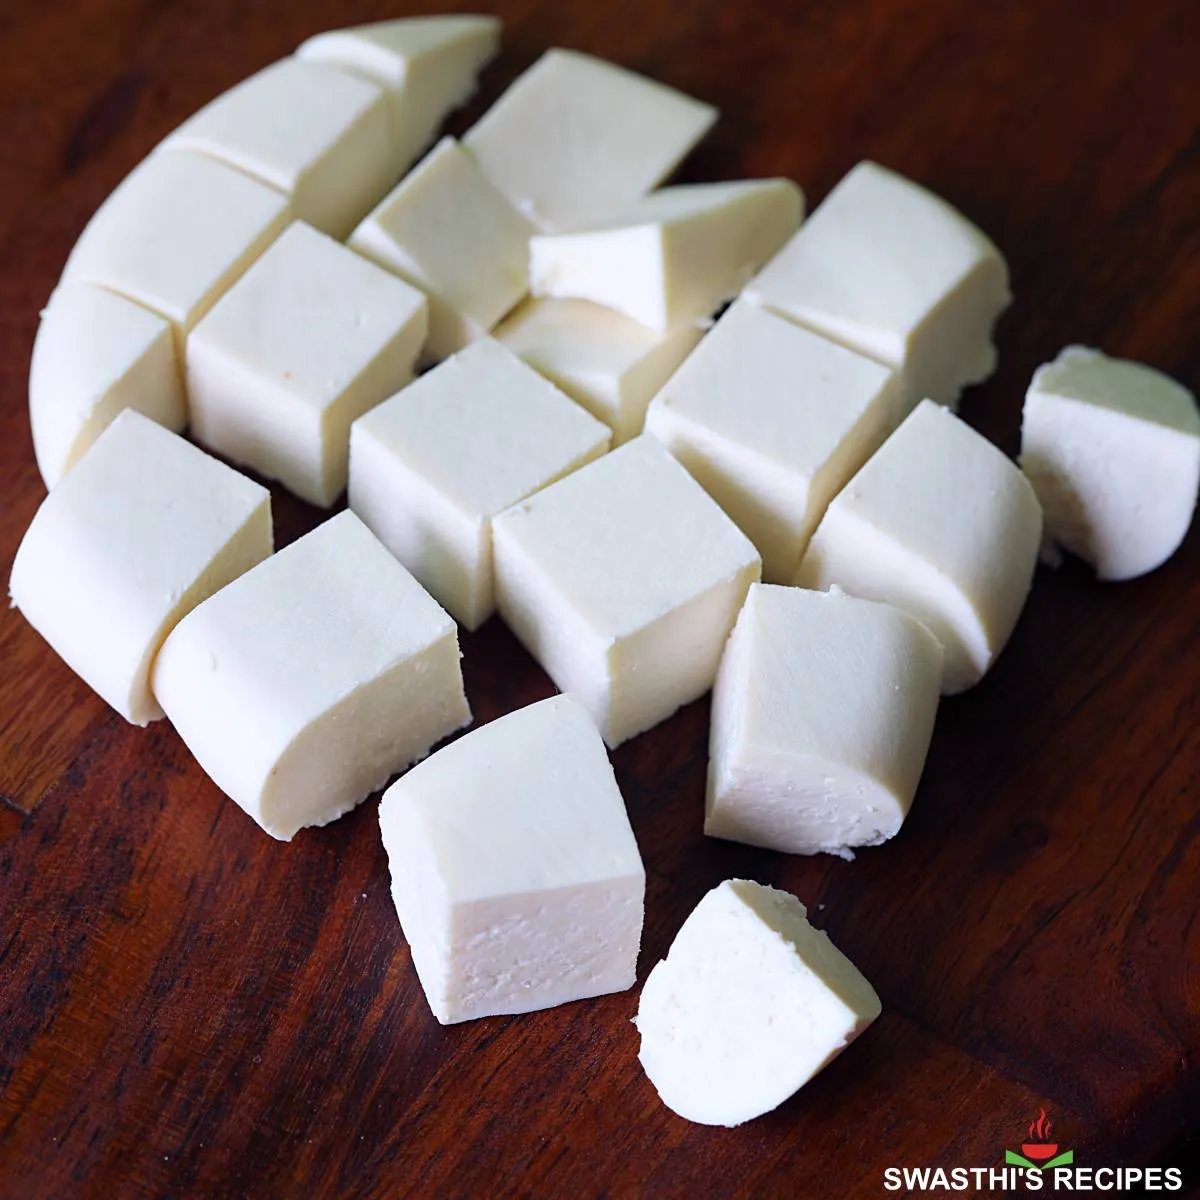 How to make Paneer (Indian Cheese)